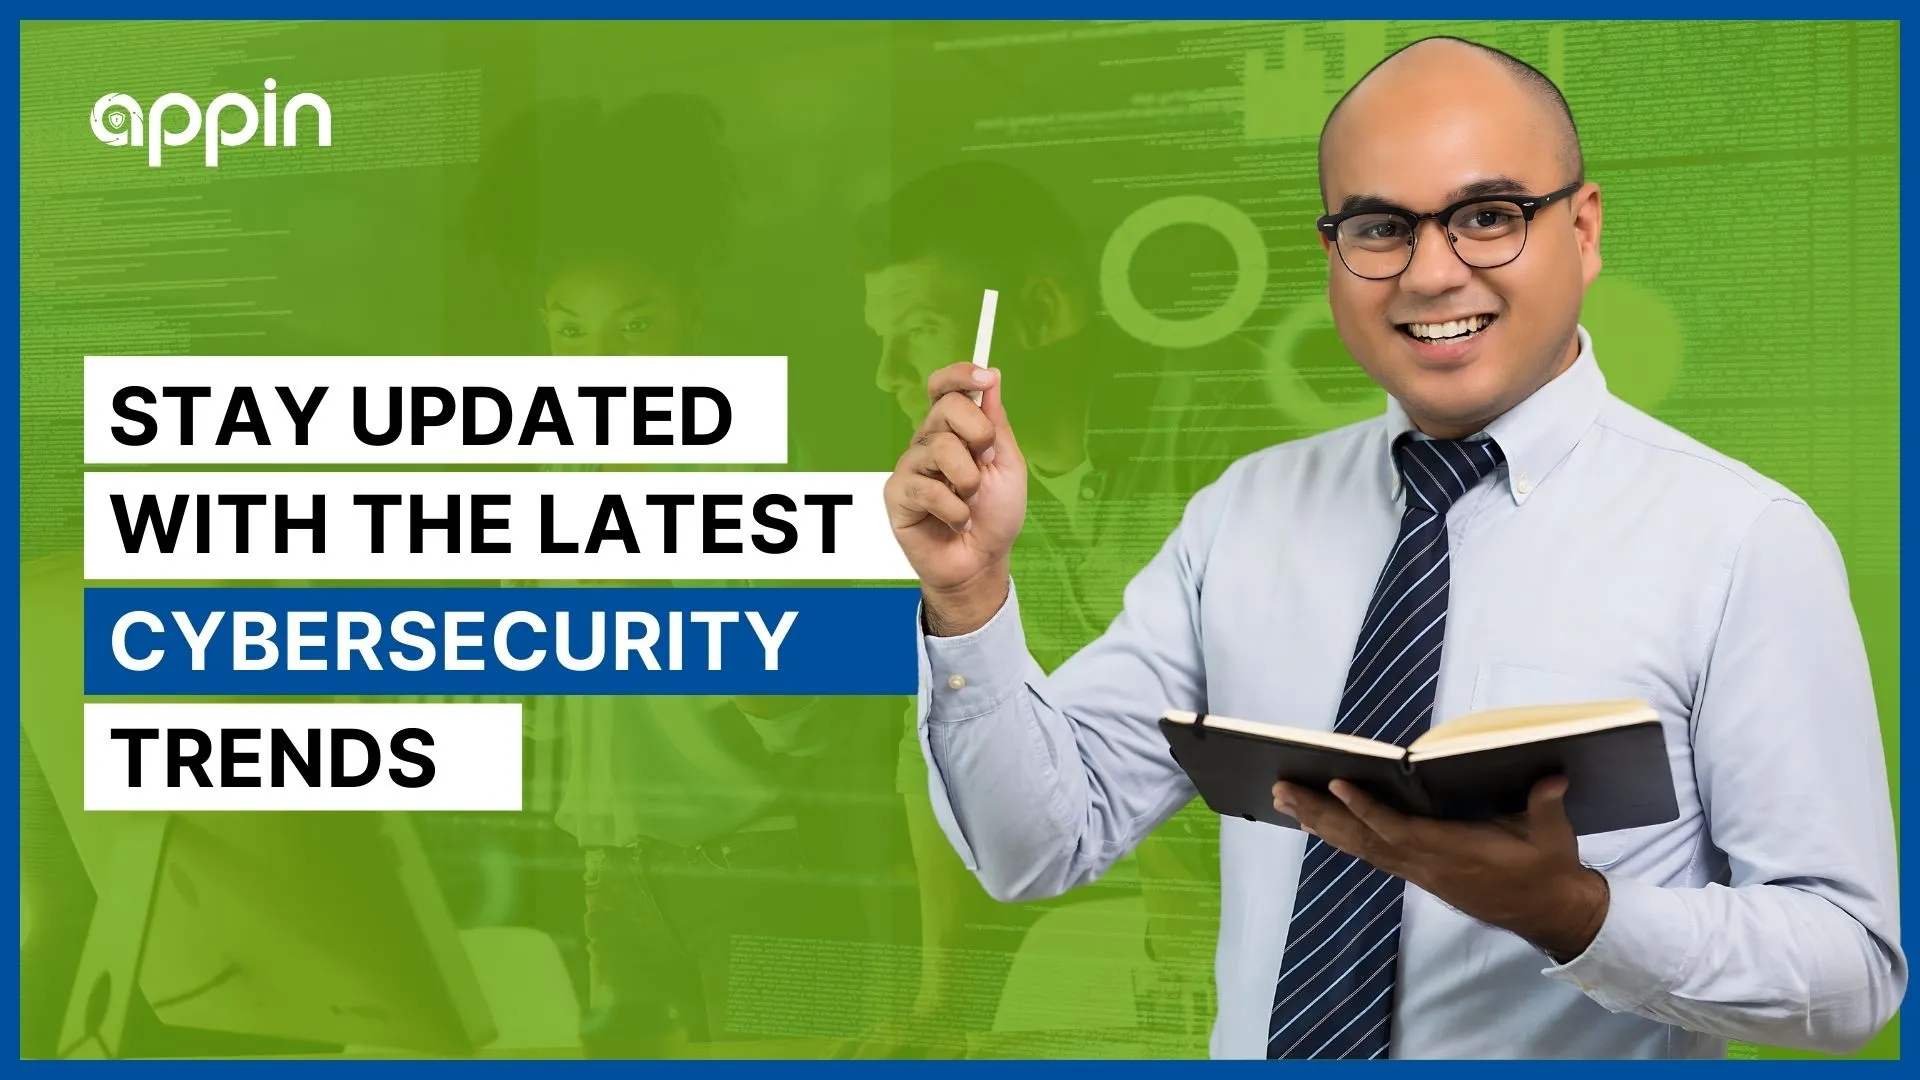 Stay Updated with the Latest Cyber Security Trends